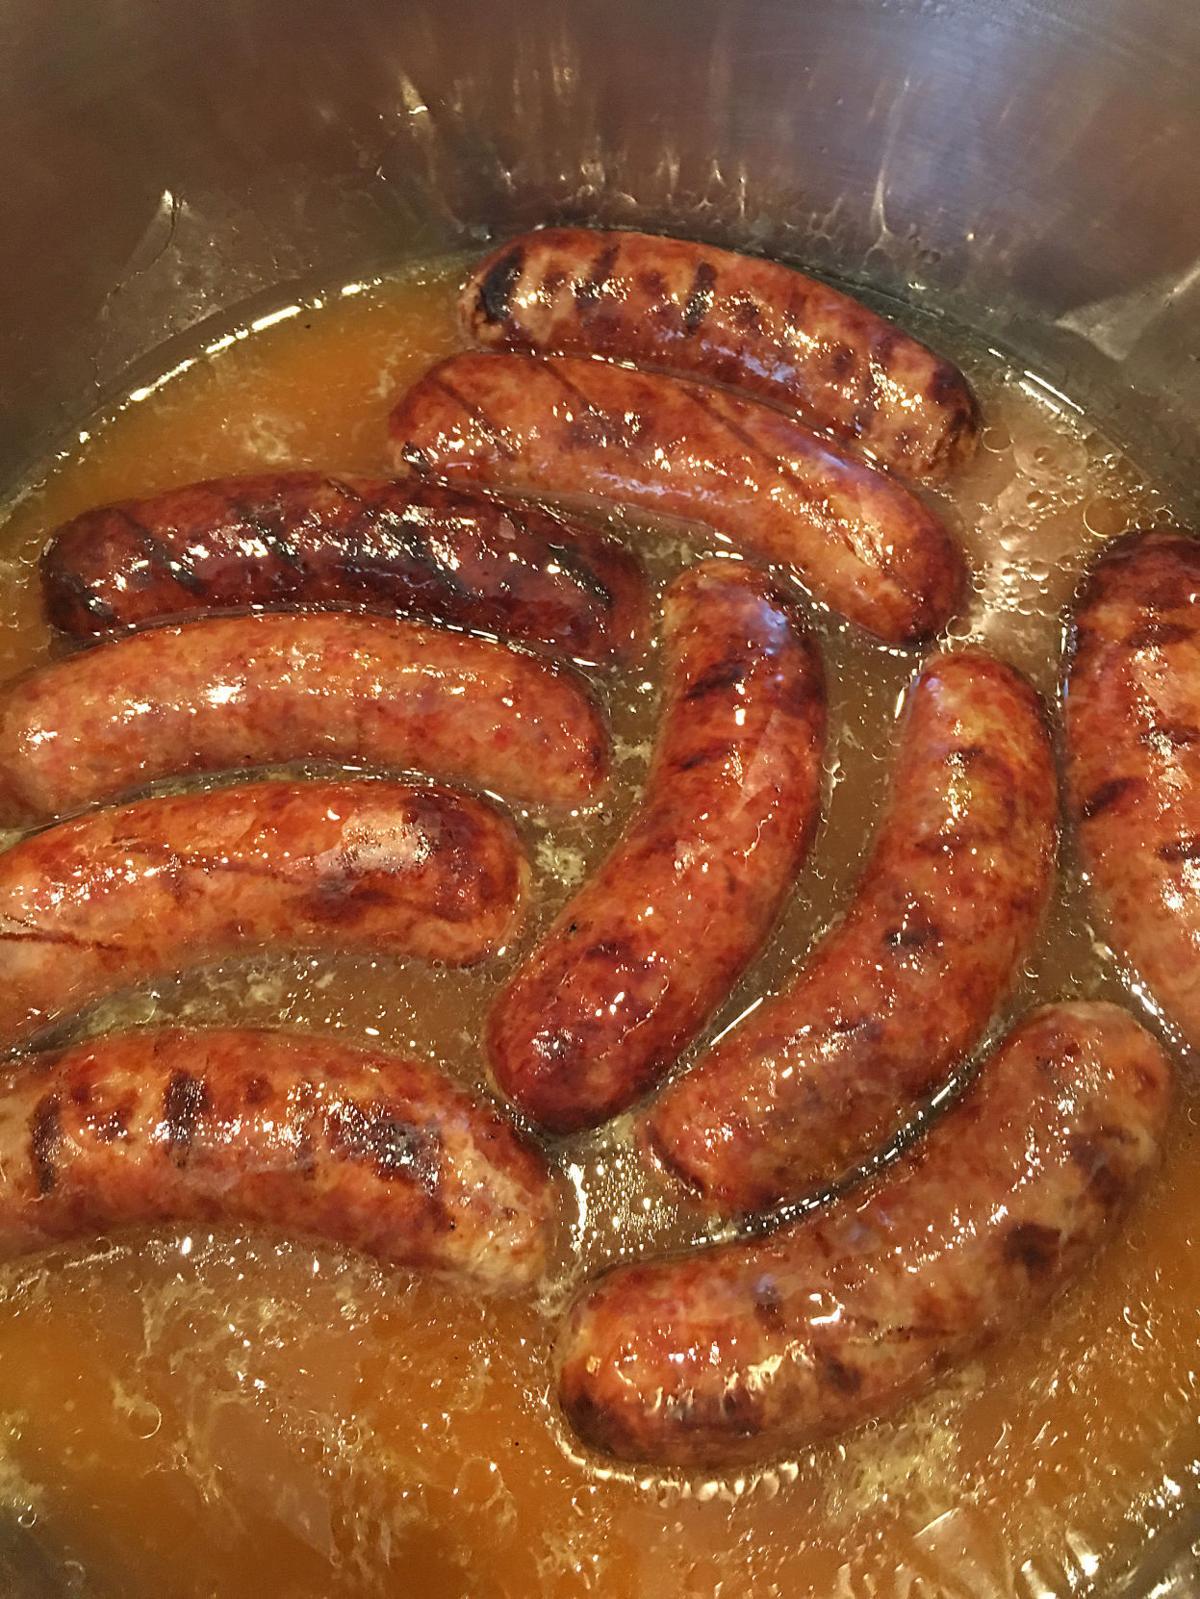 Don't toss that old beer: Make some delicious bratwurst | Food ...